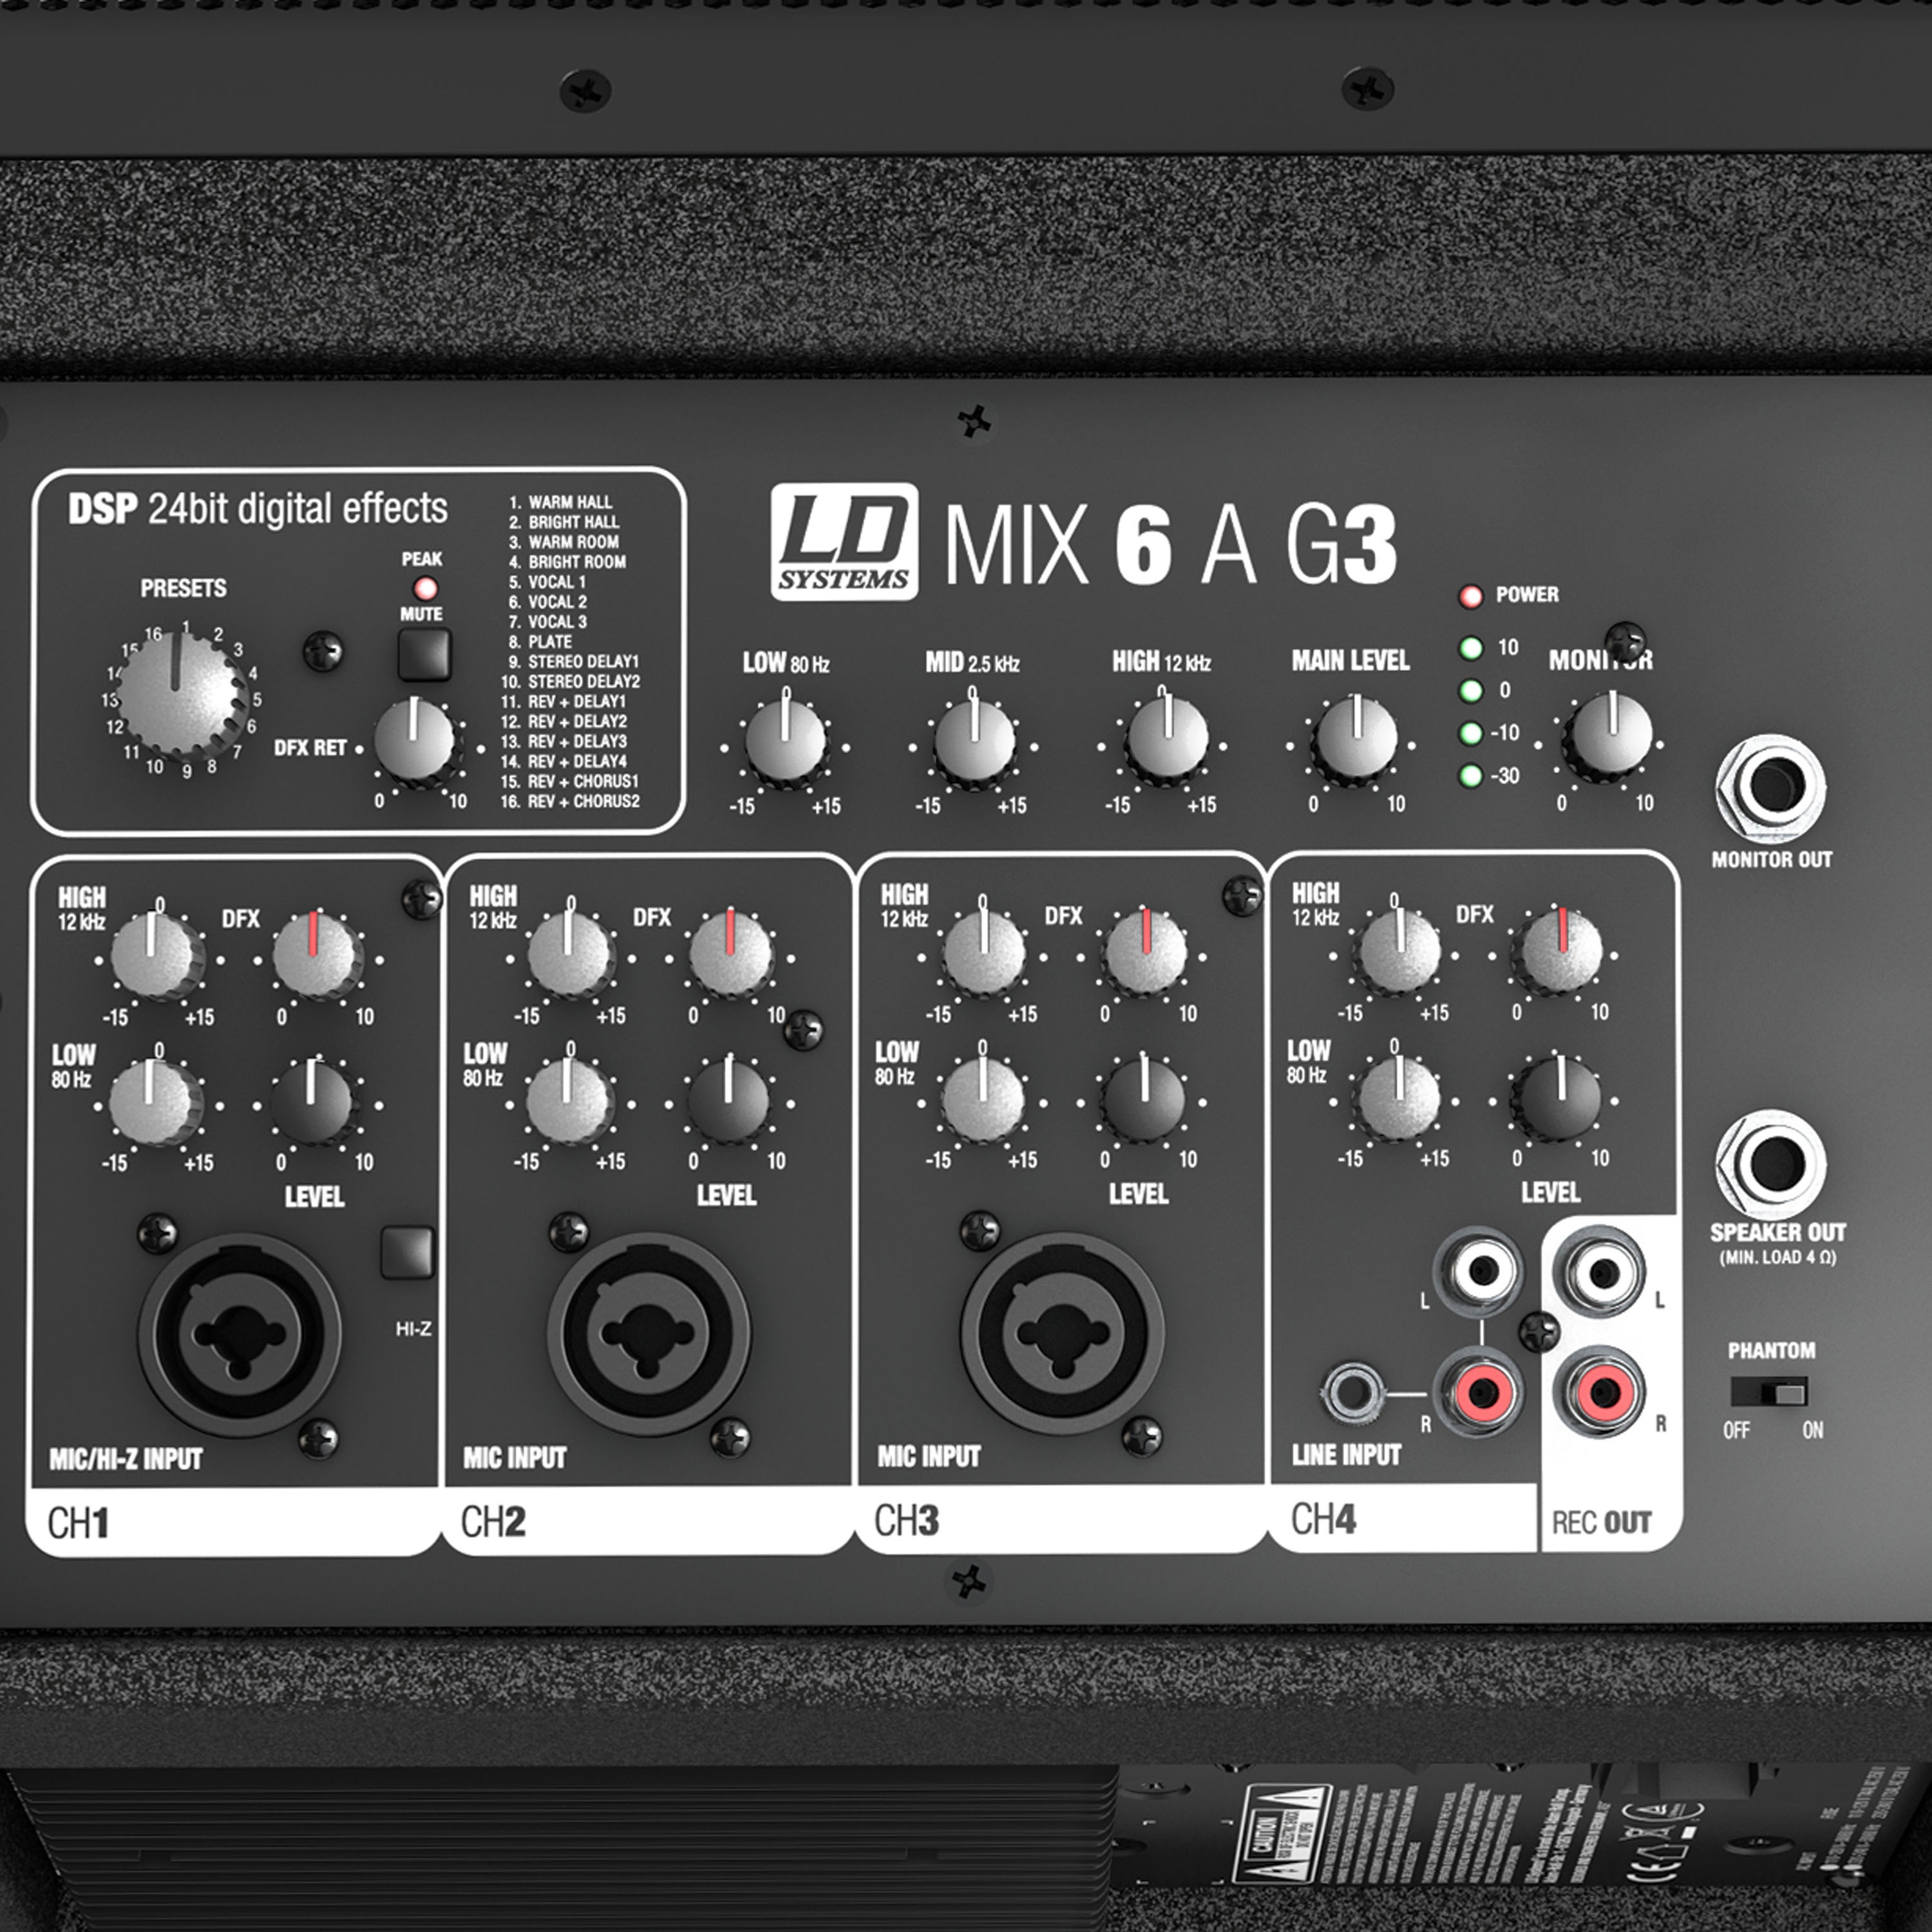 Ld Systems Mix 6 A G3 - Portable PA system - Variation 4